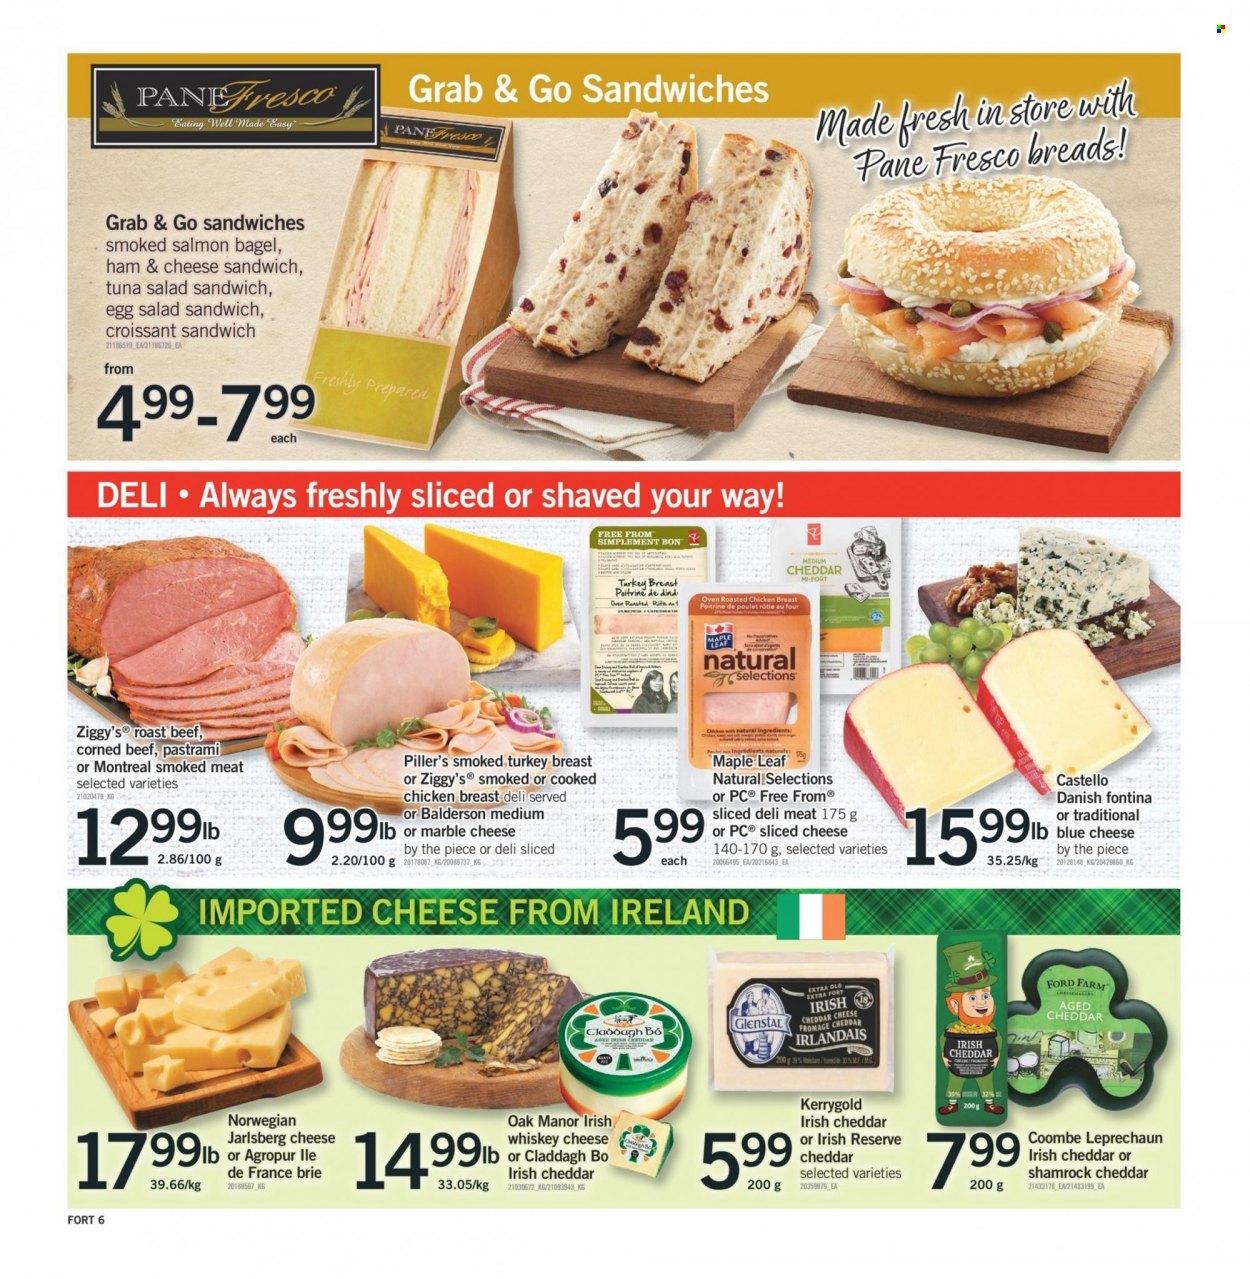 thumbnail - Fortinos Flyer - March 16, 2023 - March 22, 2023 - Sales products - bagels, croissant, salmon, smoked salmon, chicken roast, sandwich, croissant sandwich, roast, ham, pastrami, tuna salad sandwich, corned beef, blue cheese, Fontina, sliced cheese, cheddar, brie, whiskey, irish whiskey, whisky, chicken breasts, chicken, beef meat, roast beef. Page 7.